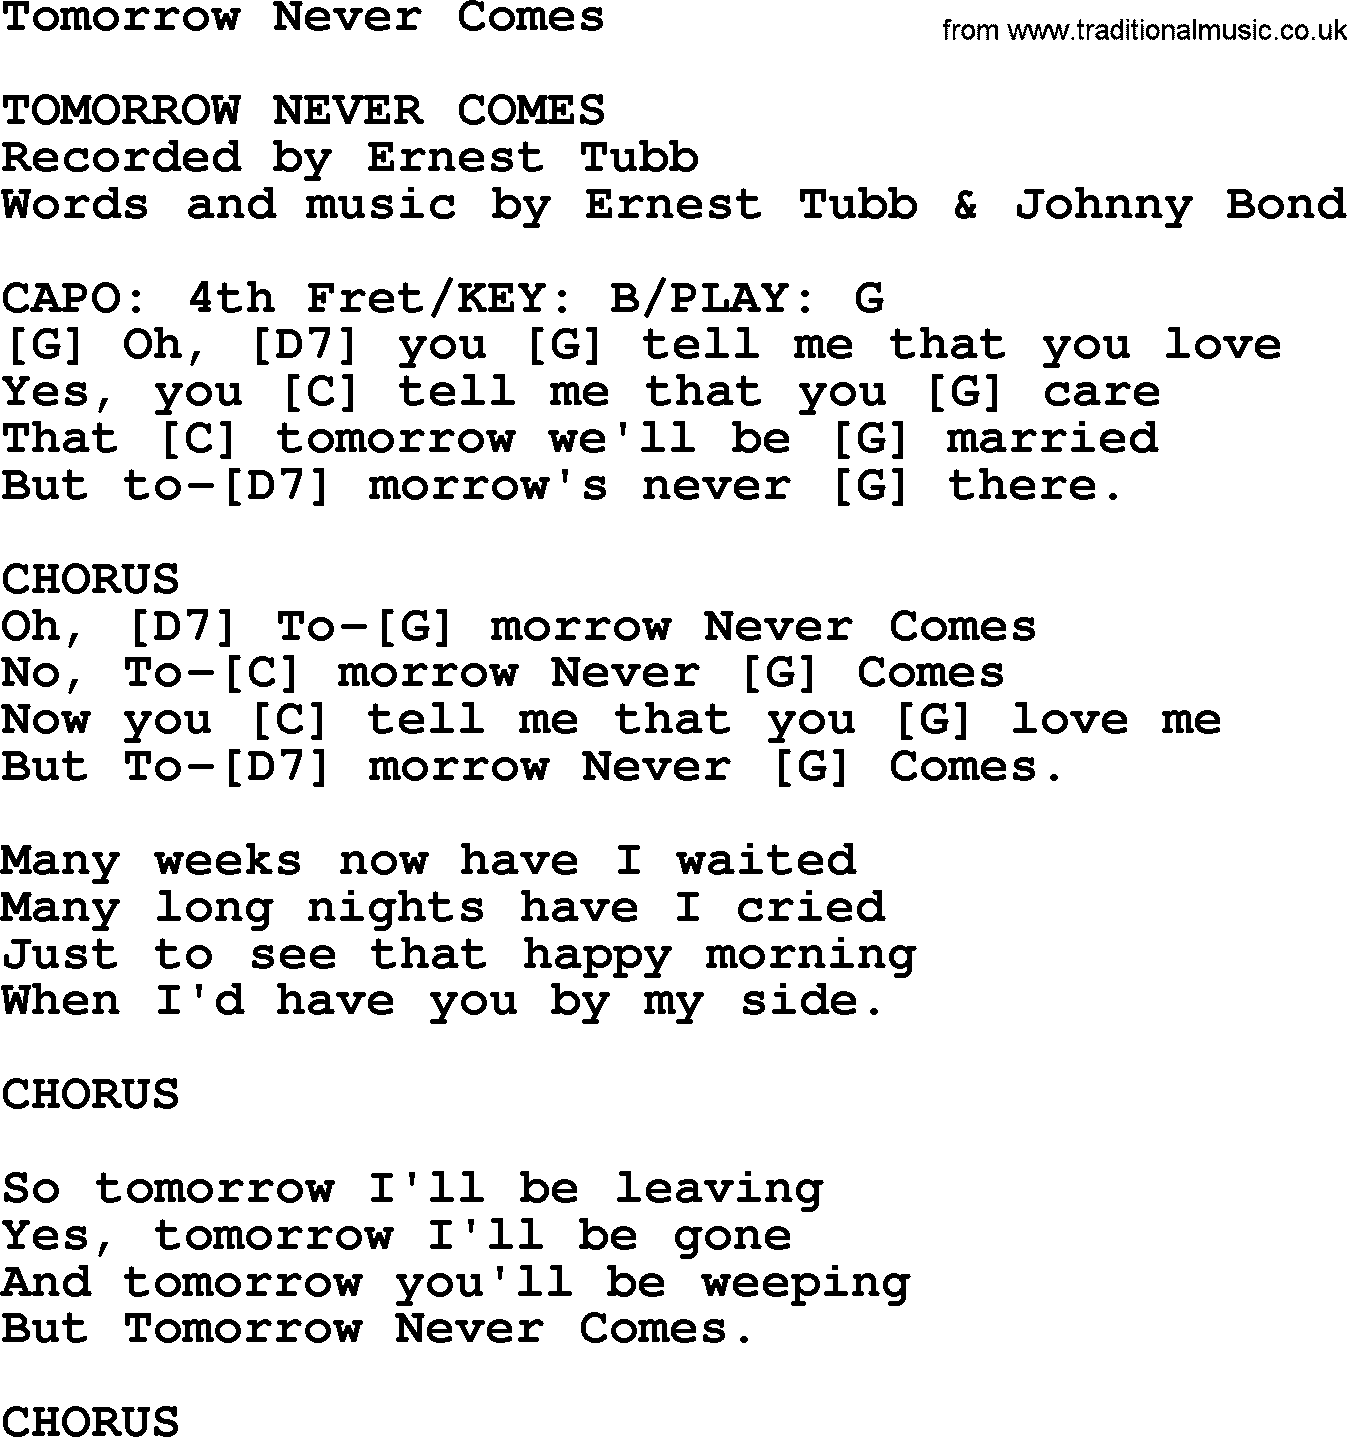 Bluegrass song: Tomorrow Never Comes, lyrics and chords